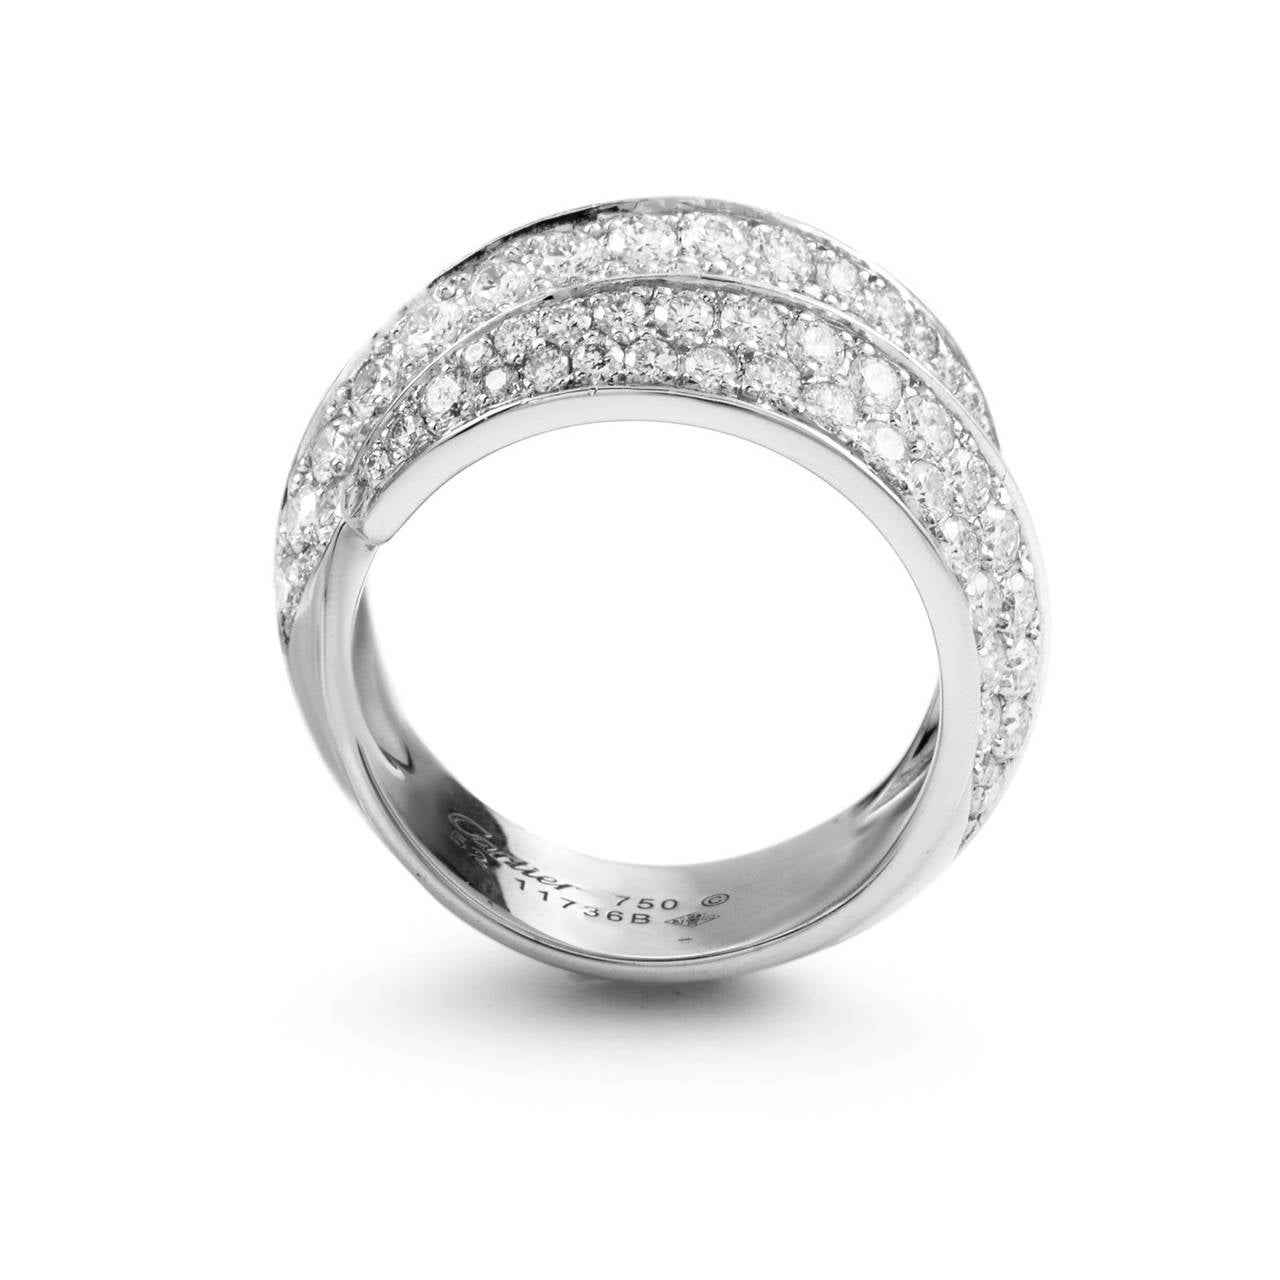 The shimmering, smooth body of this ring from Cartier cannot be ignored. Forged from the finest 18K white gold and set with a partial pave of 1.60 carats of diamonds, this ring is a real gem.

Included Items: Manufacturer's Box
Ring Size: 6.5 (52